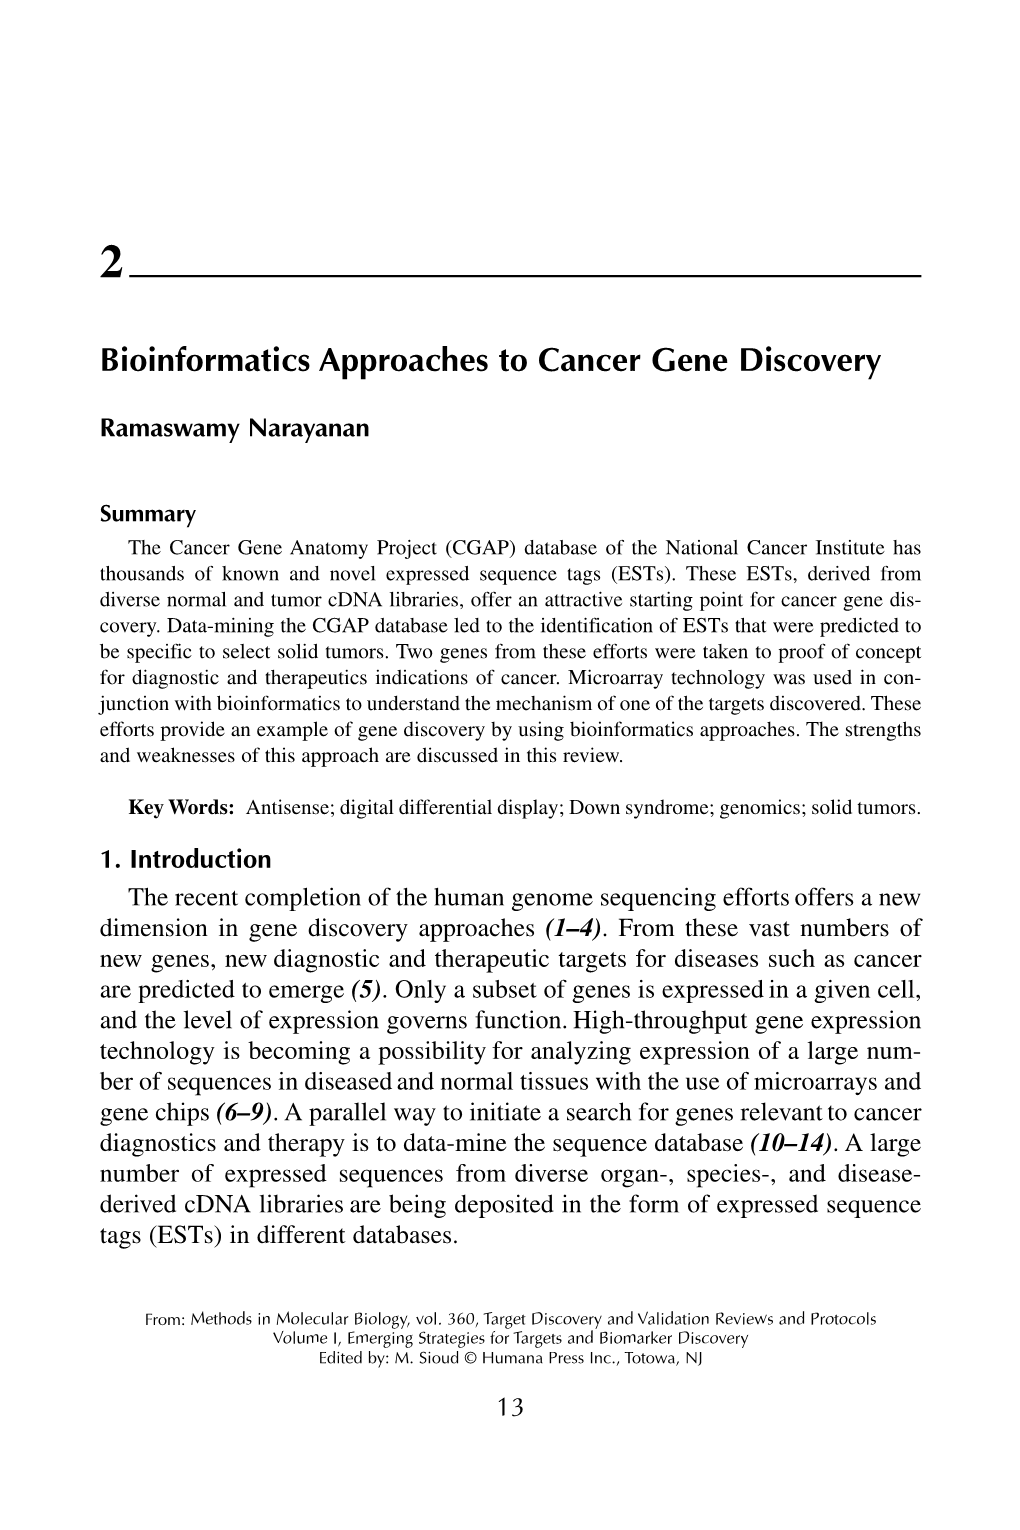 Bioinformatics Approaches to Cancer Gene Discovery